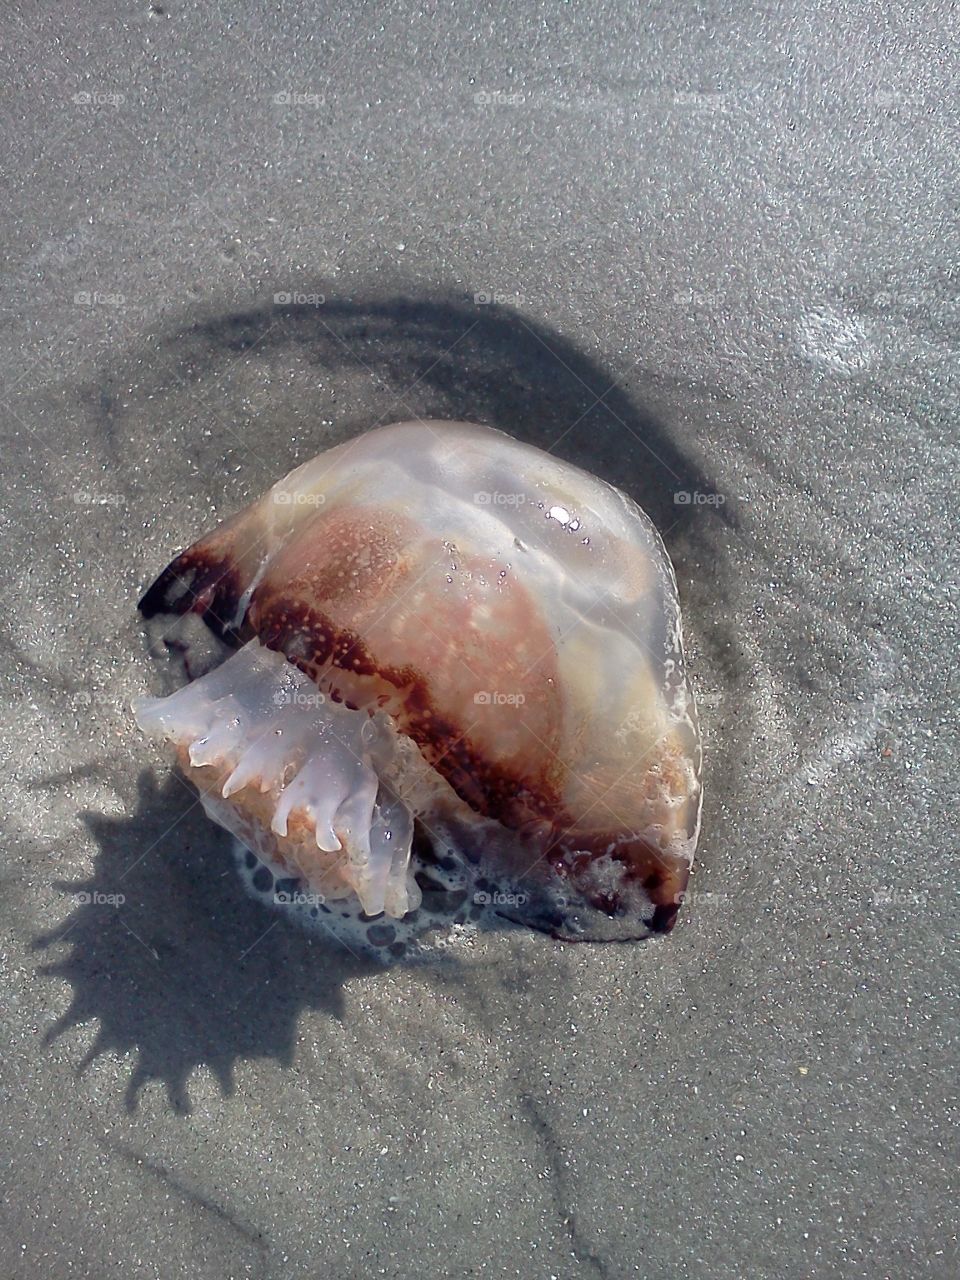 jellyfish laying on the beach, jellyfish washed ashore, jellyfish calm, sandy beaches, sandy summer fun, oceanview, ocean water, summer and happy times